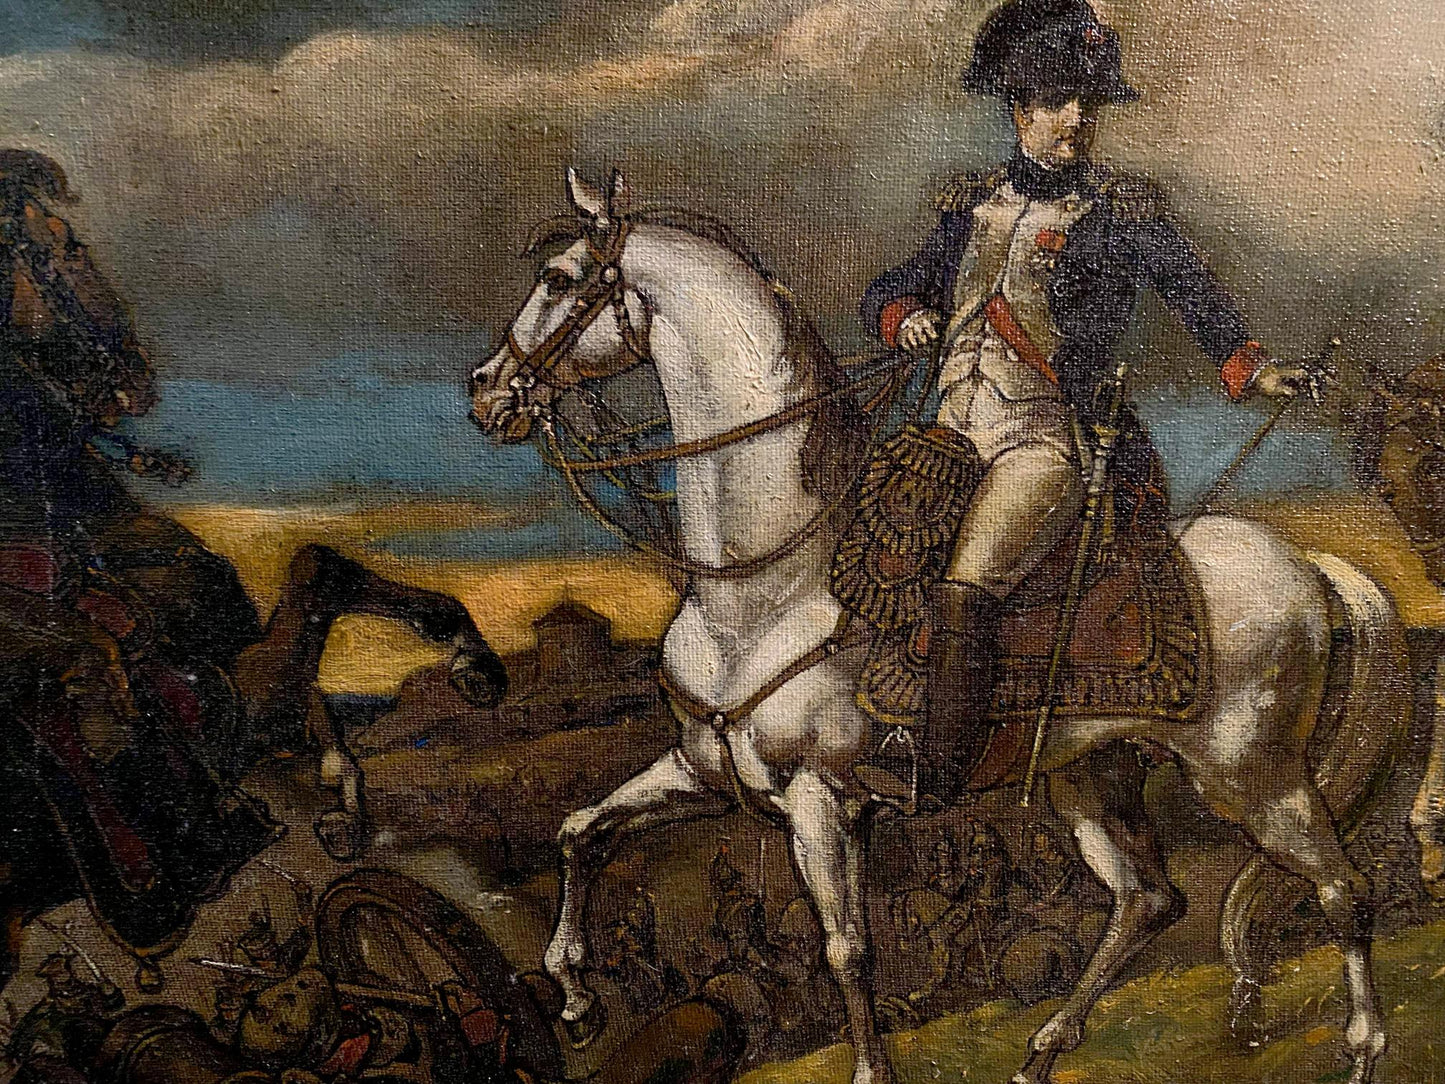 Oleg Litvinov's oil painting offers a glimpse into the era of Napoleon and his army